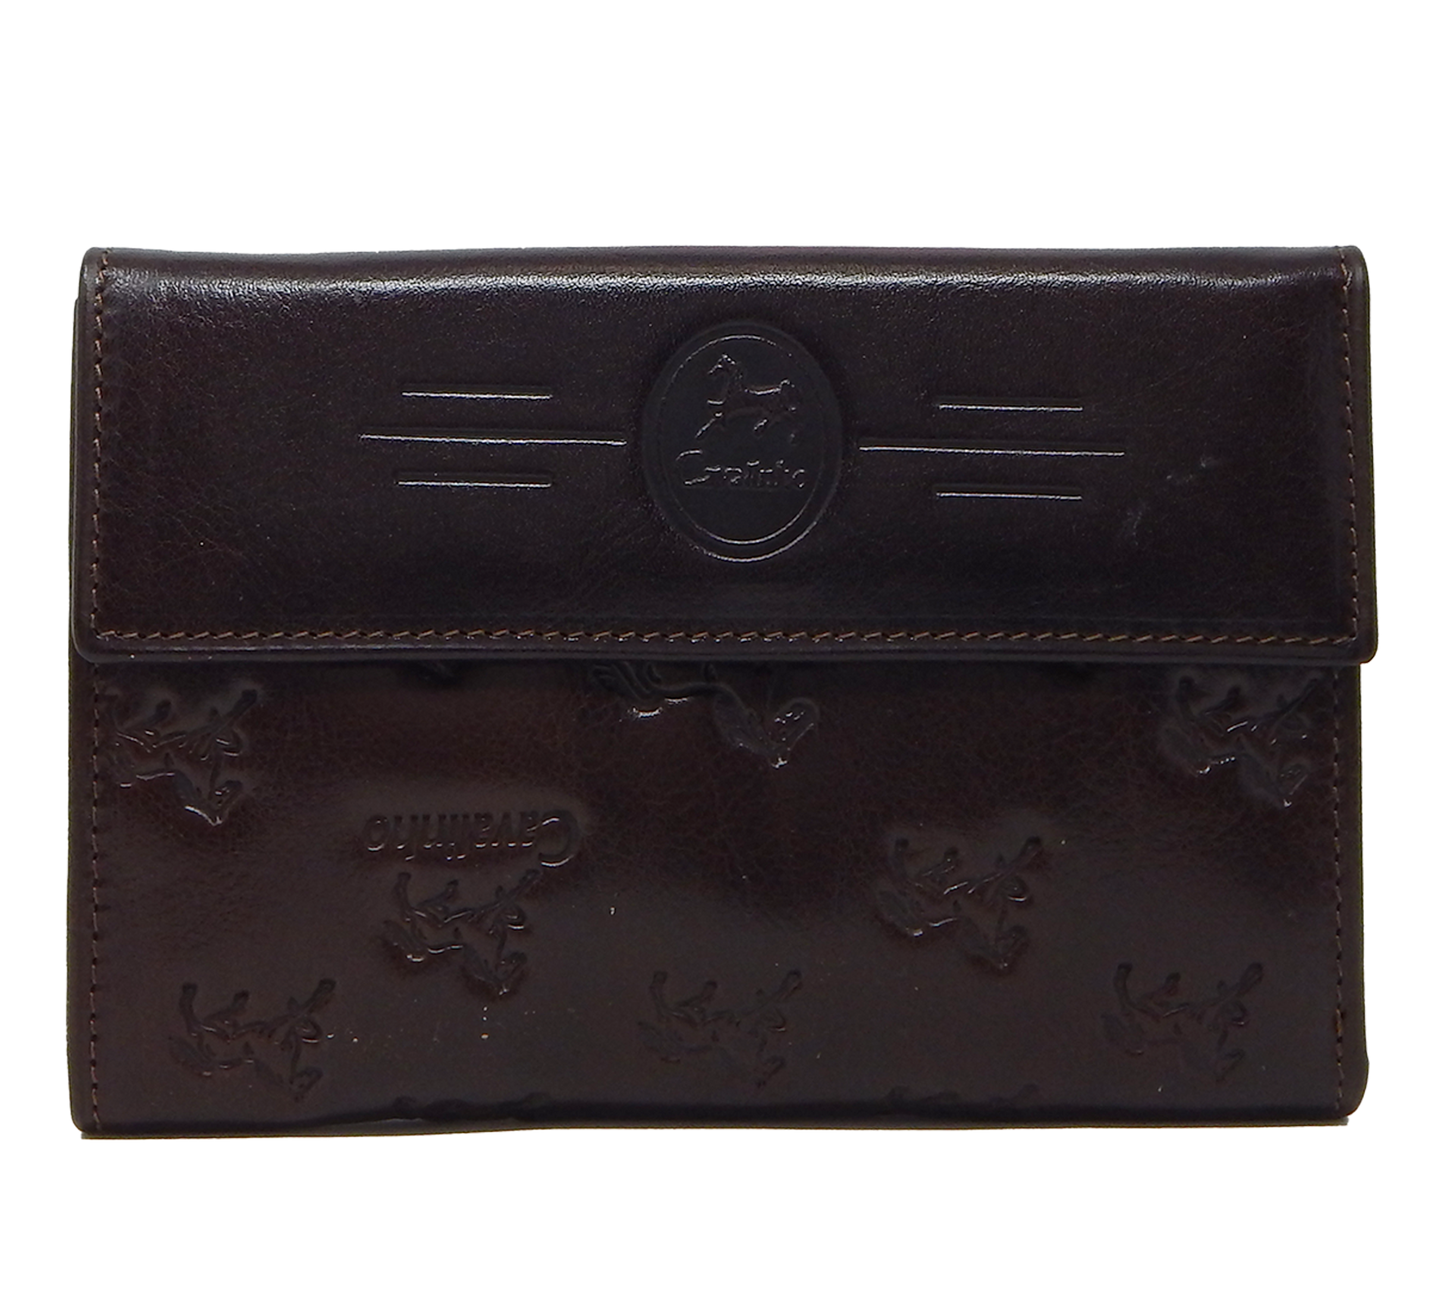 #color_ Brown | Cavalinho Cavalo Lusitano Leather Wallet - Brown - 28090204_02_b_a32425cd-b91b-47d1-a70b-90a71af47496